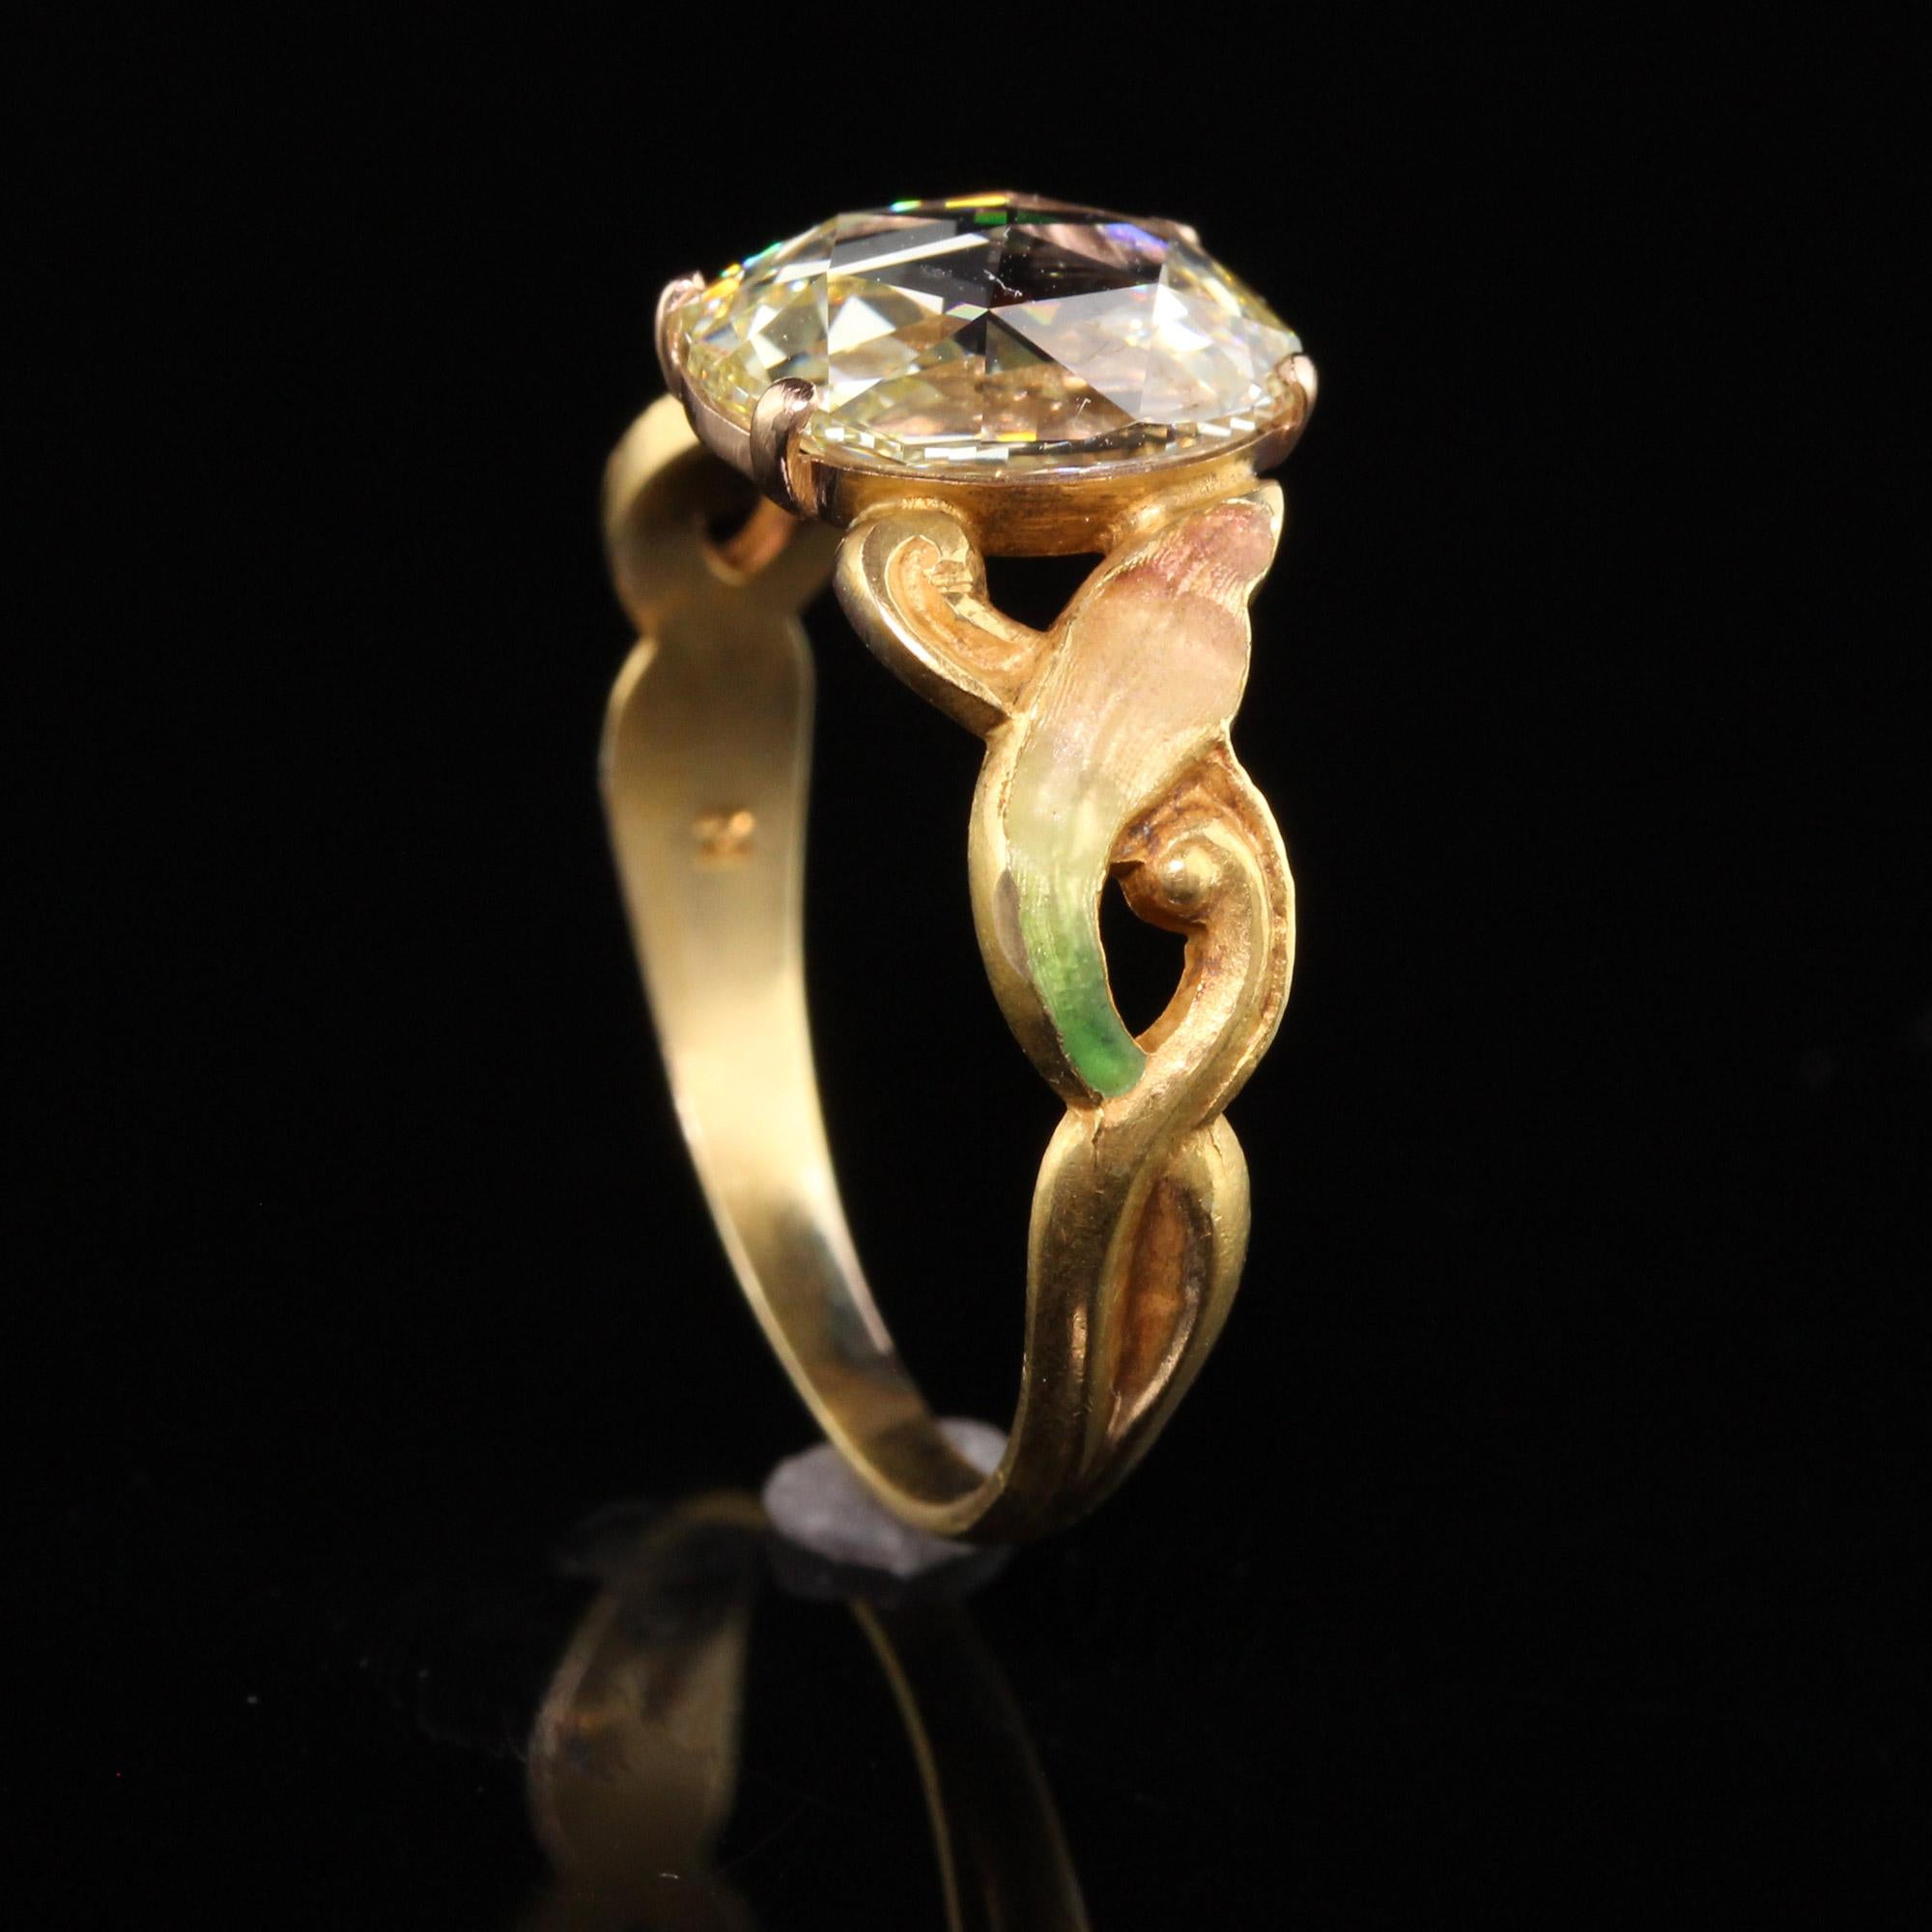 Antique Art Nouveau 18K Yellow Gold Domed Rose Cut Diamond Engagement Ring In Good Condition For Sale In Great Neck, NY